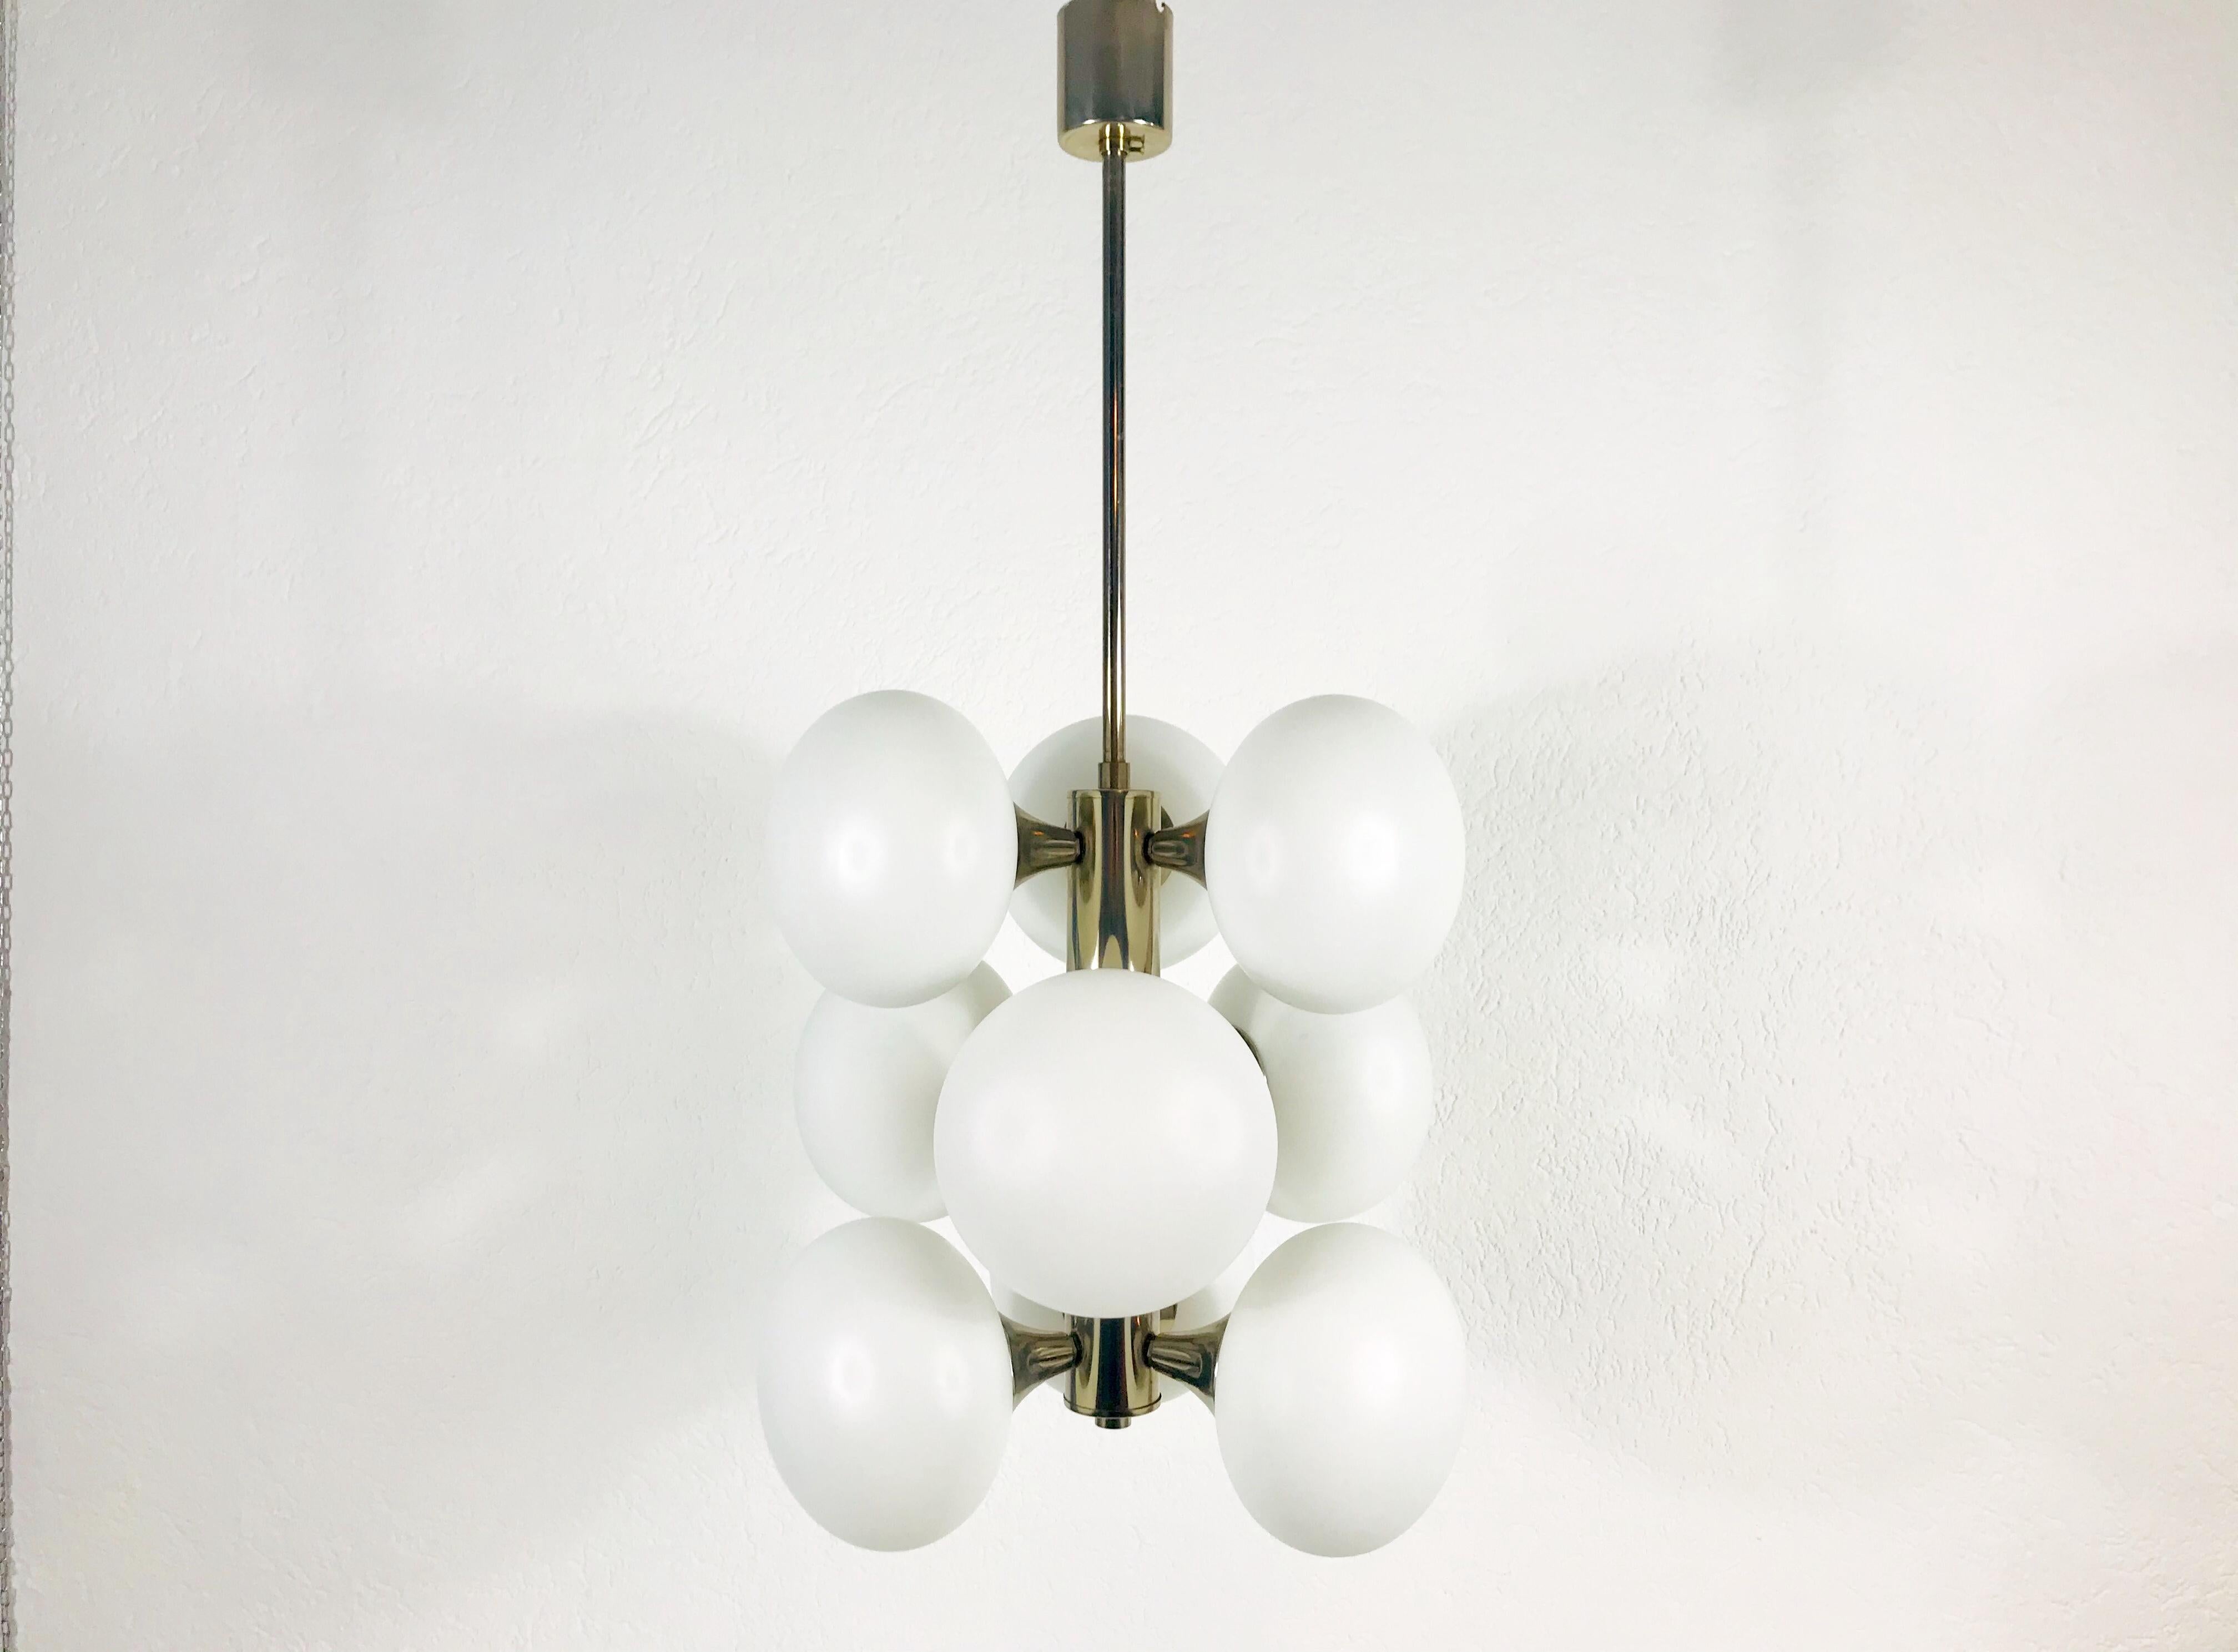 A midcentury chandelier made in Germany in the 1960s. It is fascinating with its Space Age design and nine opal glass balls. The body of the light is made of chrome metal, including the arms. 

The light requires nine E14 light bulbs.